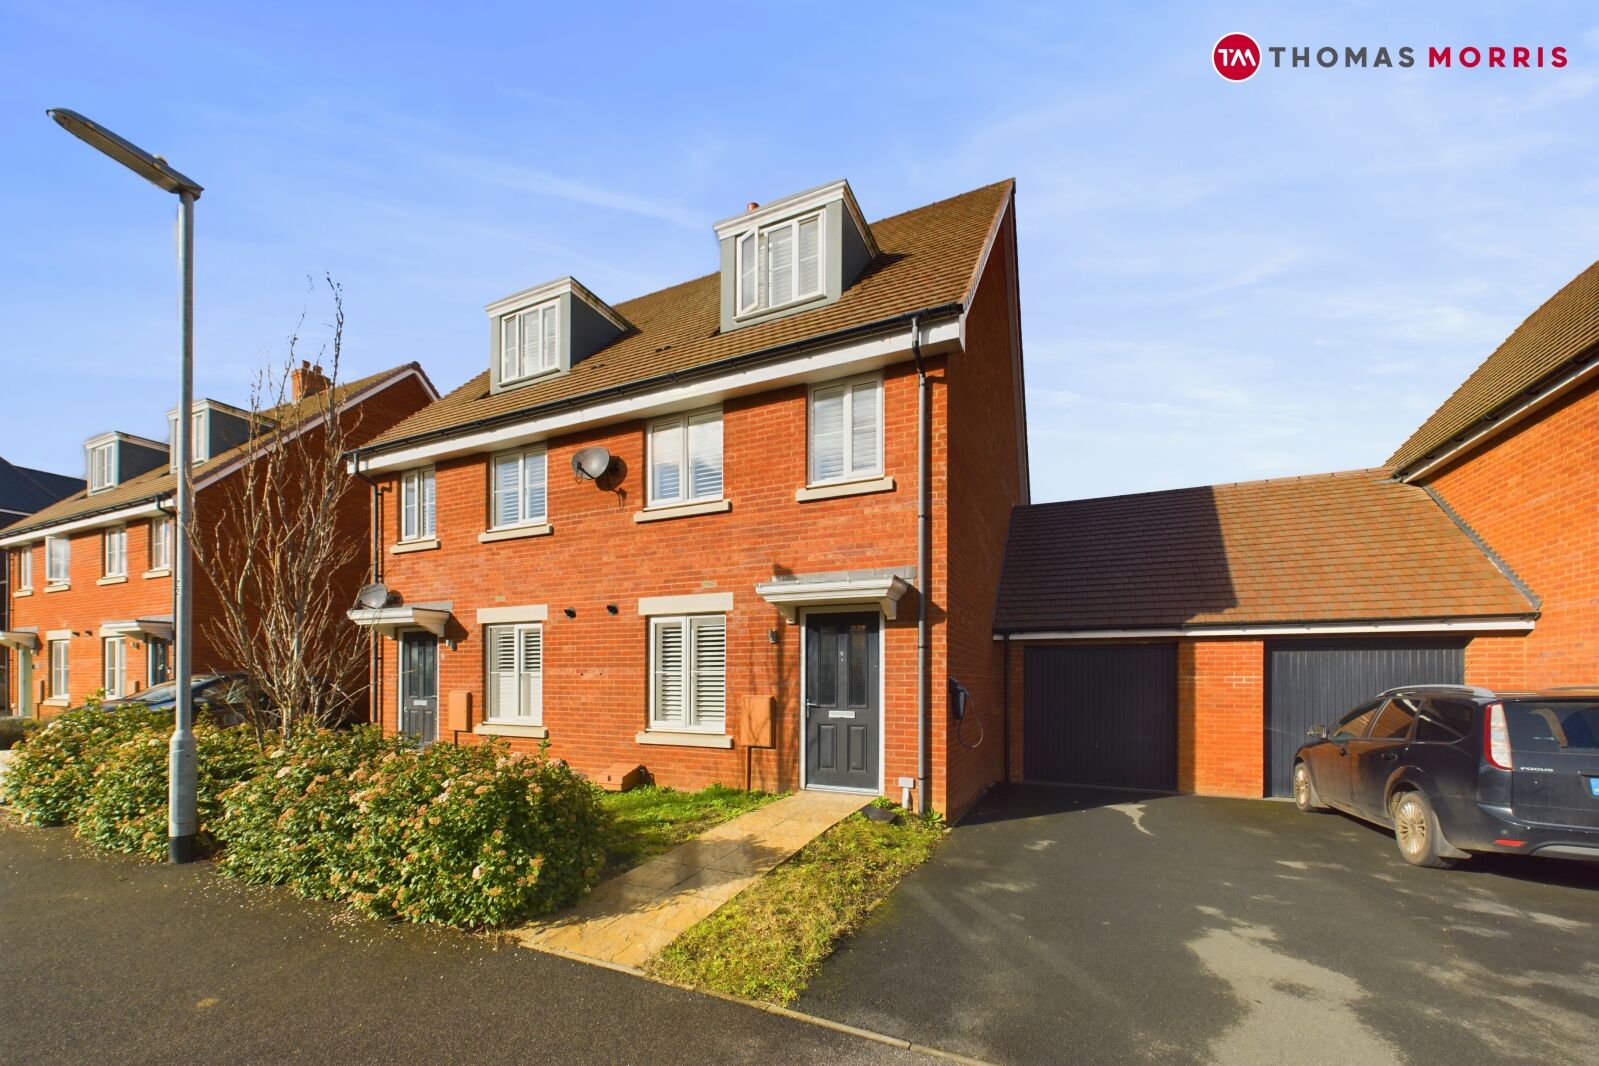 3 bedroom semi detached house for sale Ouse Way, Biggleswade, SG18, main image